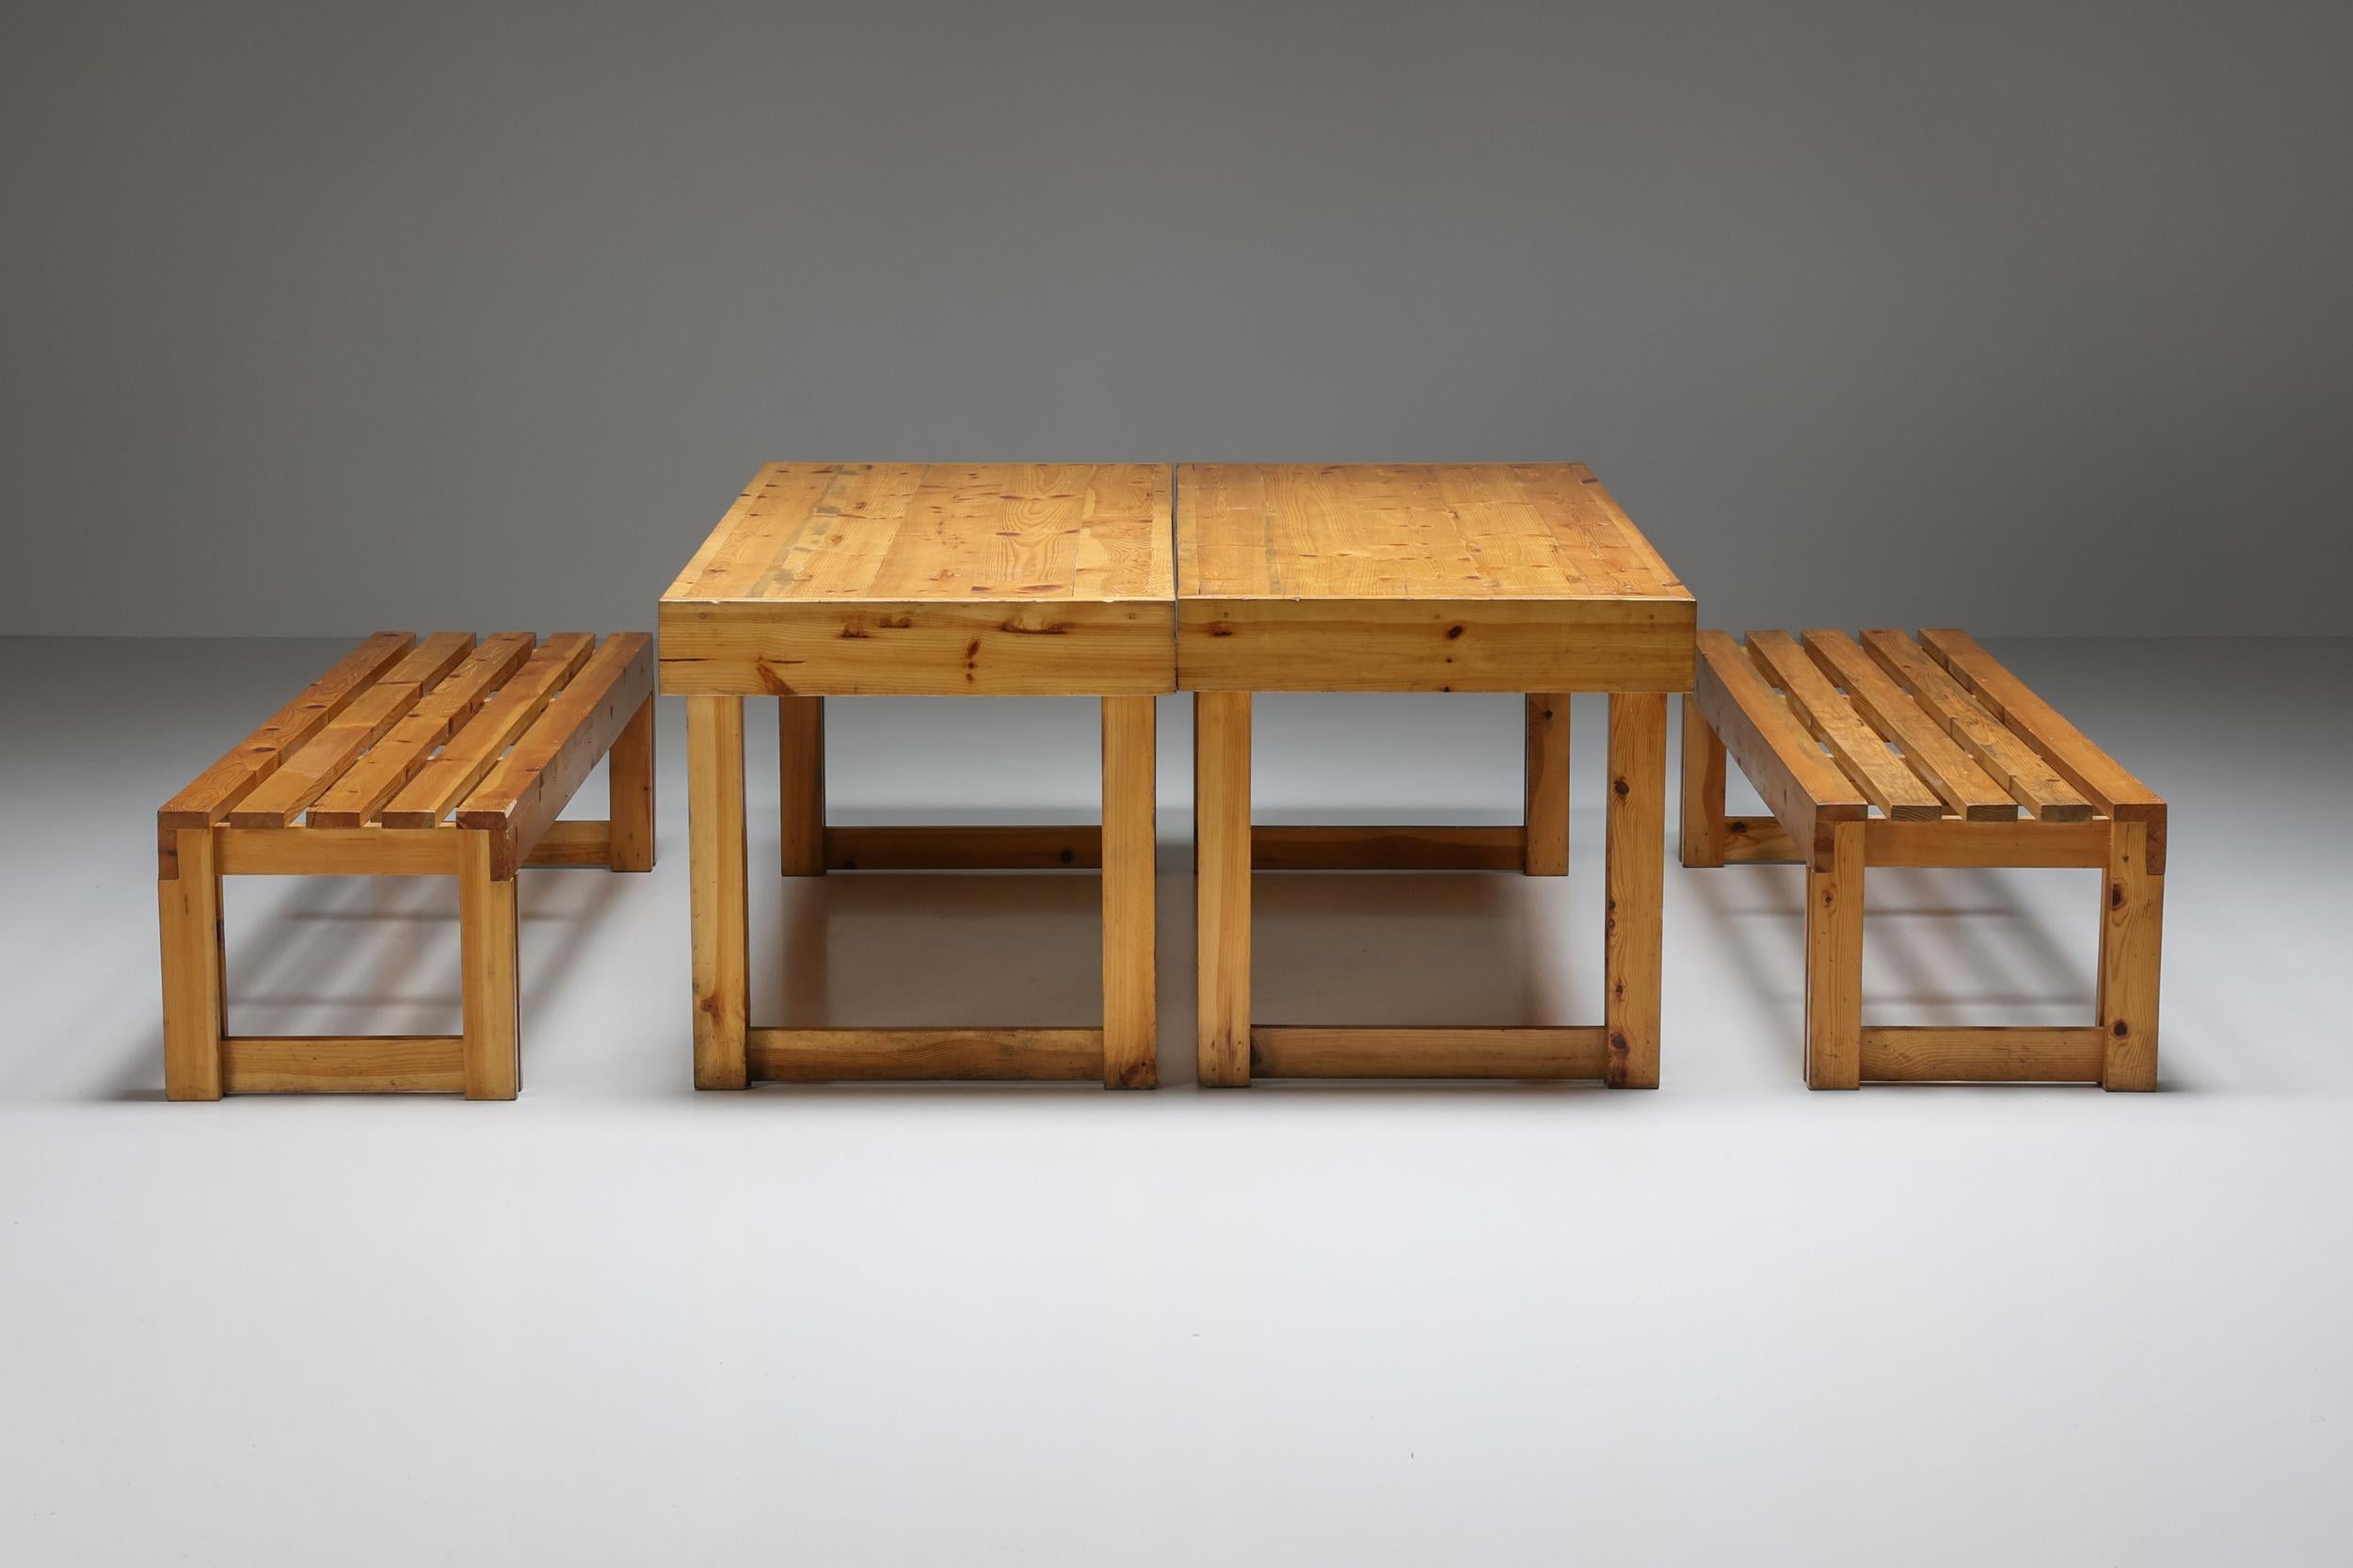 Italian Pine Bench Set from Old Vineyard, Modernist, Italy, 1960's For Sale 6